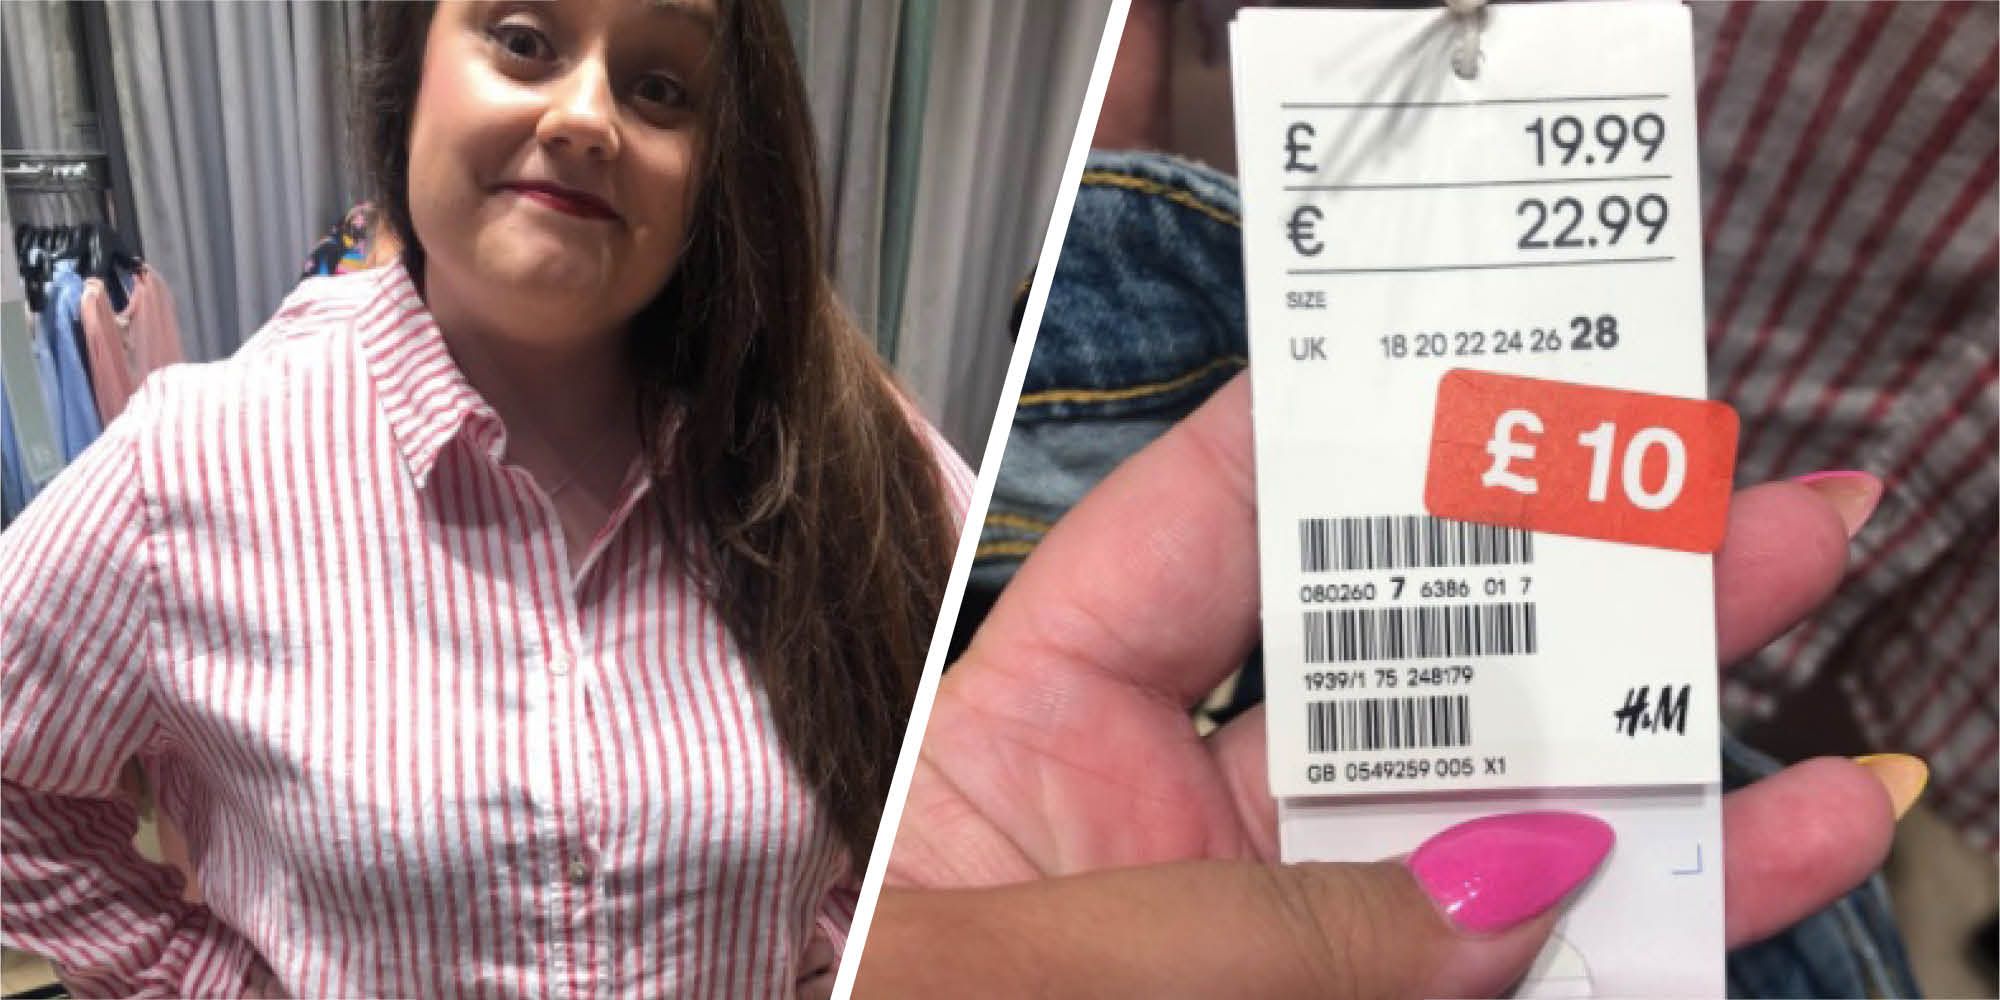 This blogger has exposed H&M's sizing